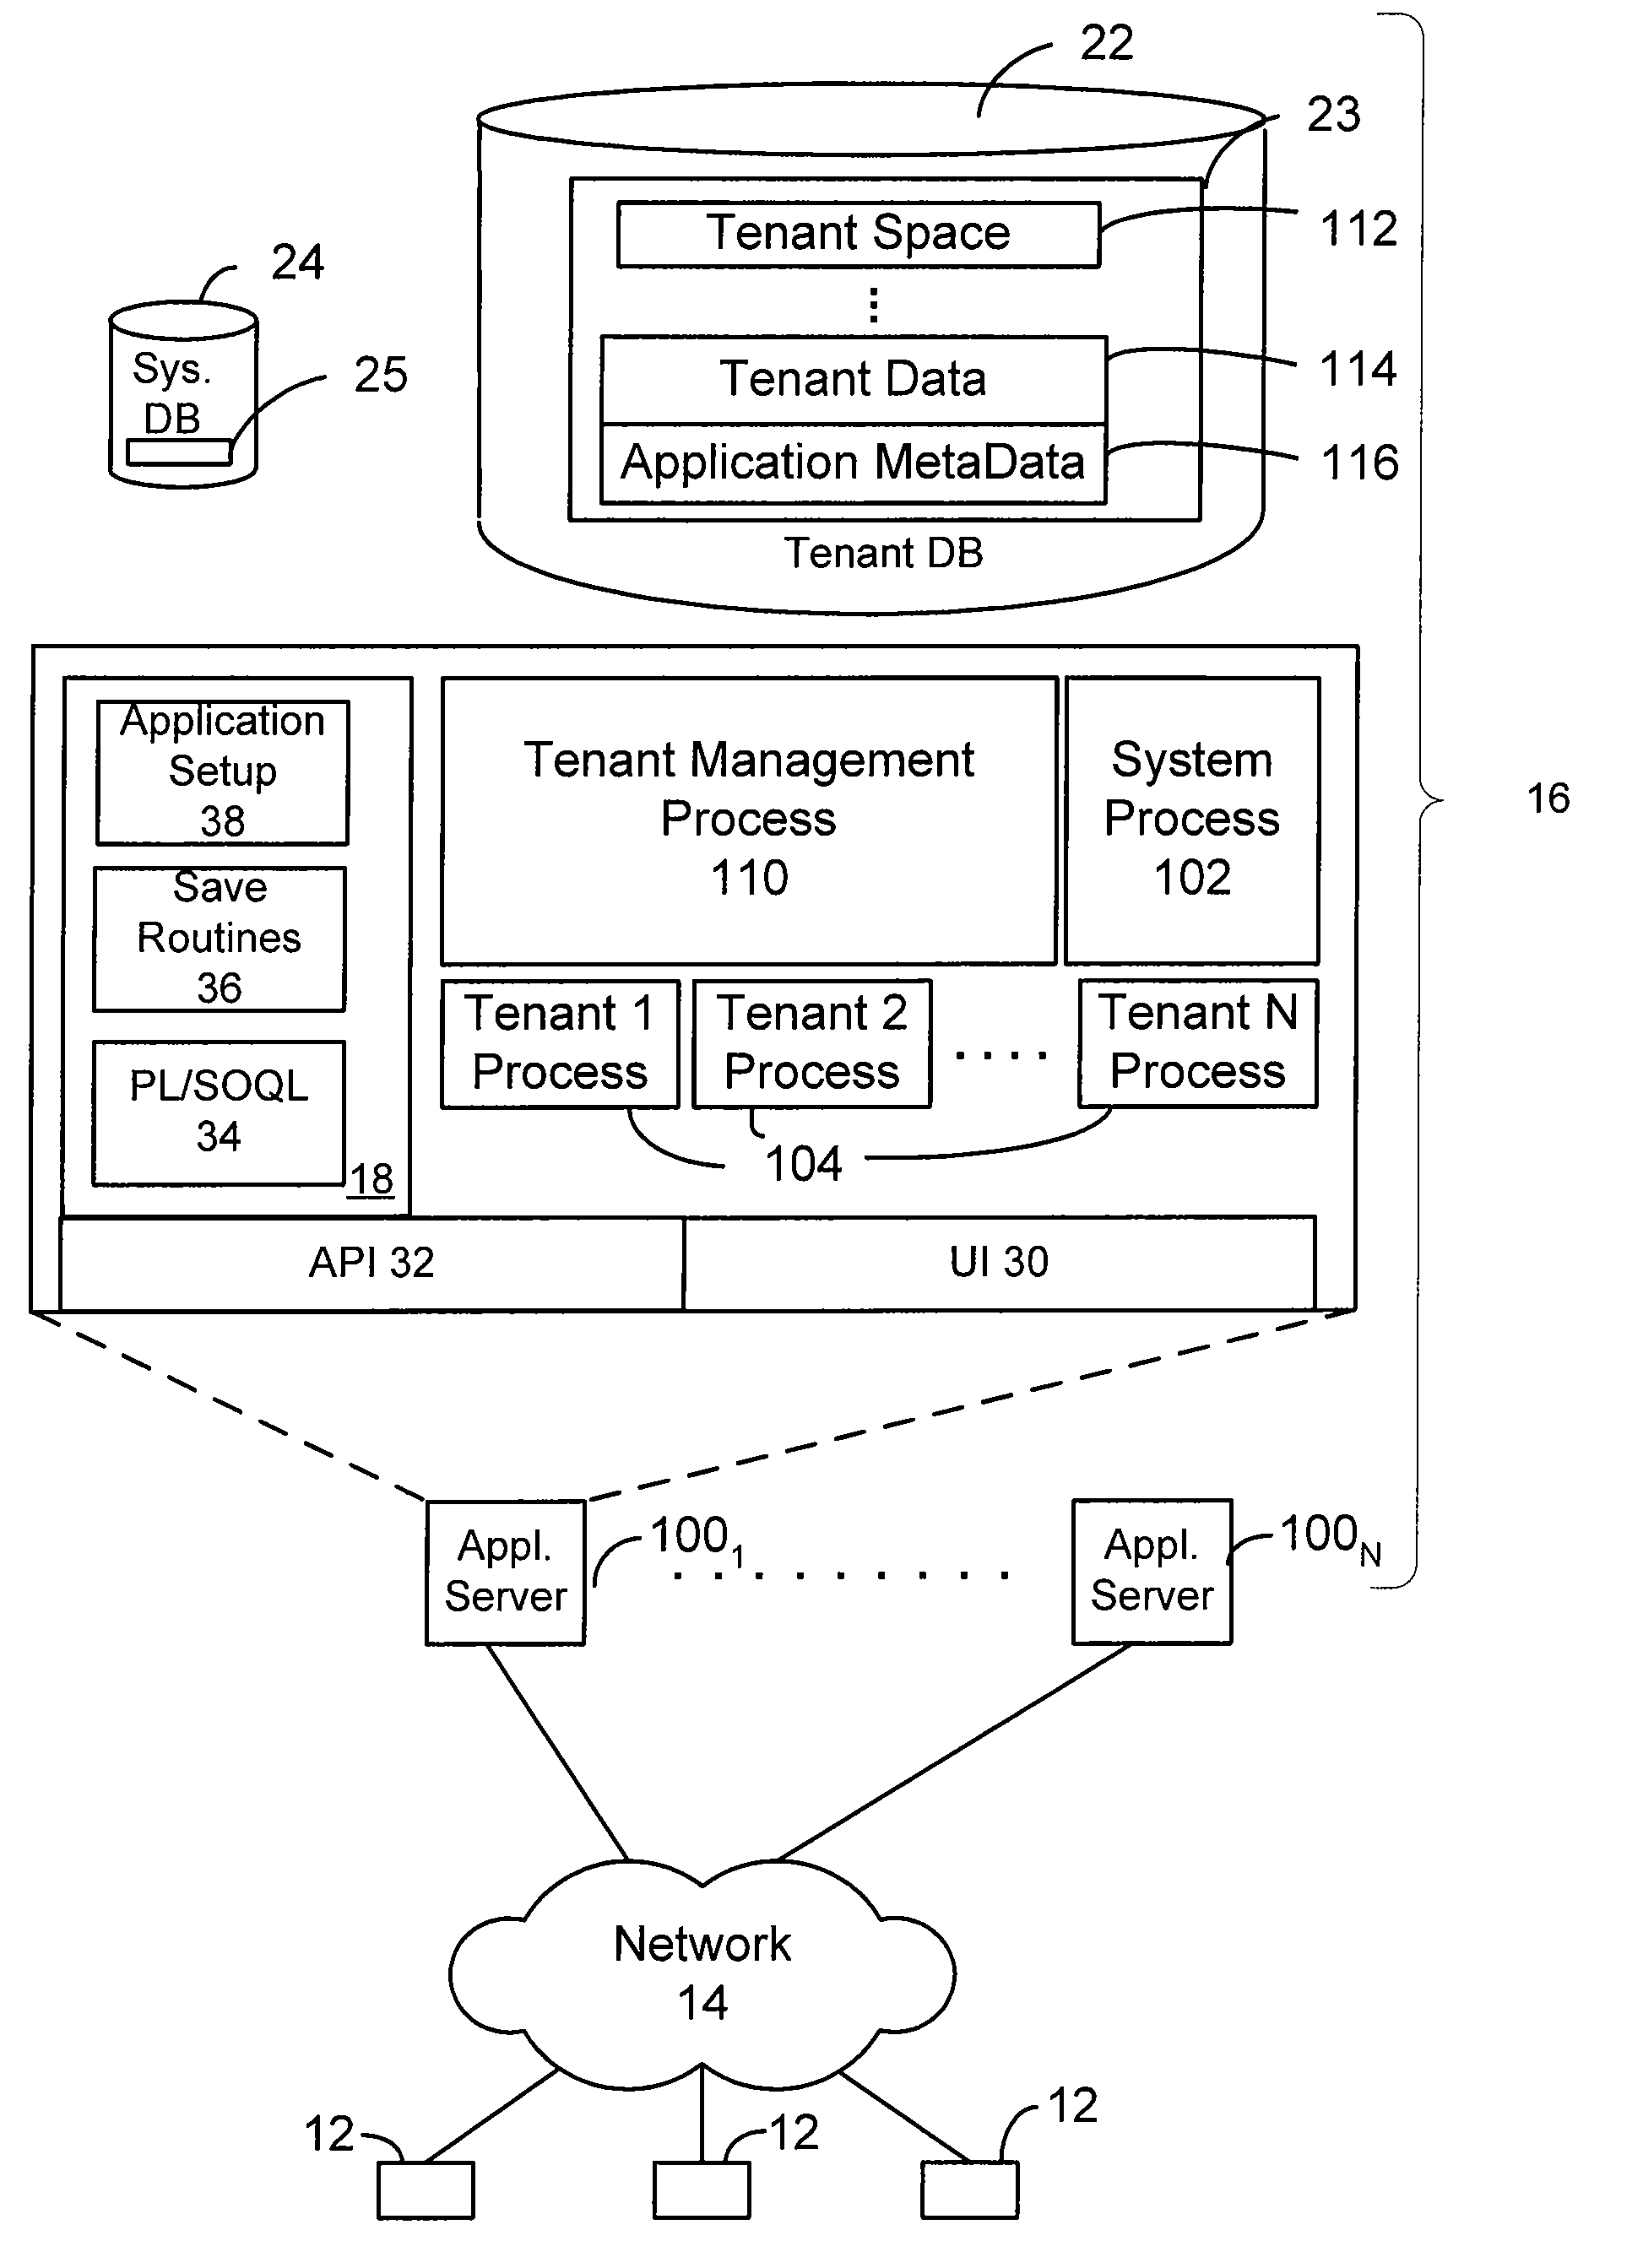 Systems and methods for implementing many object to object relationships in a multi-tenant environment